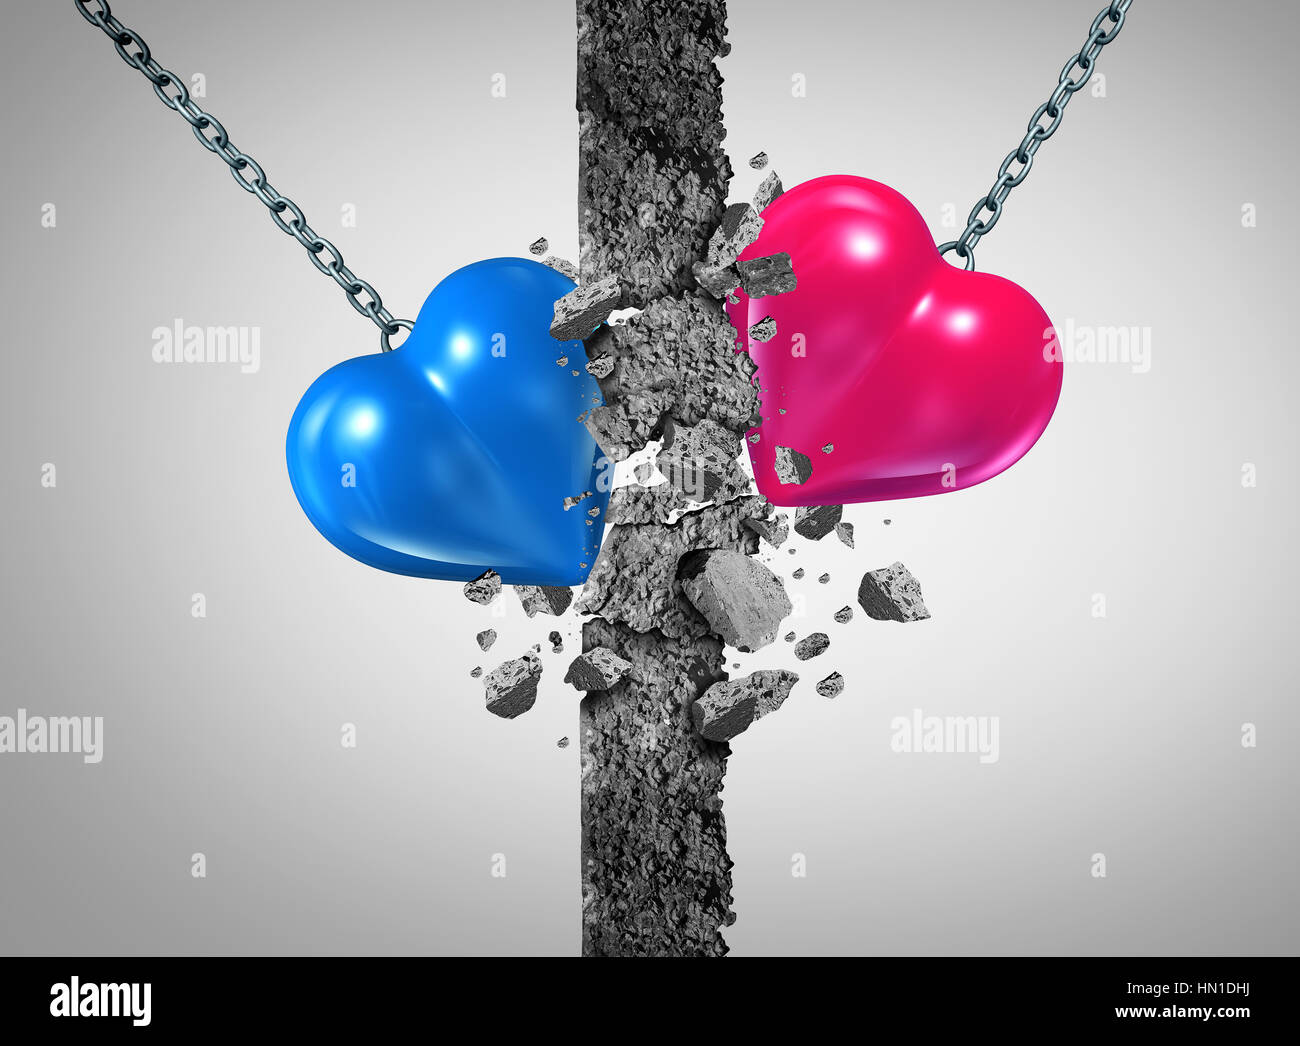 Breaking a relationship wall and romantic couple challenge or marriage problems symbol as a blue and pink heart demolishing an obstacle to passioin su Stock Photo